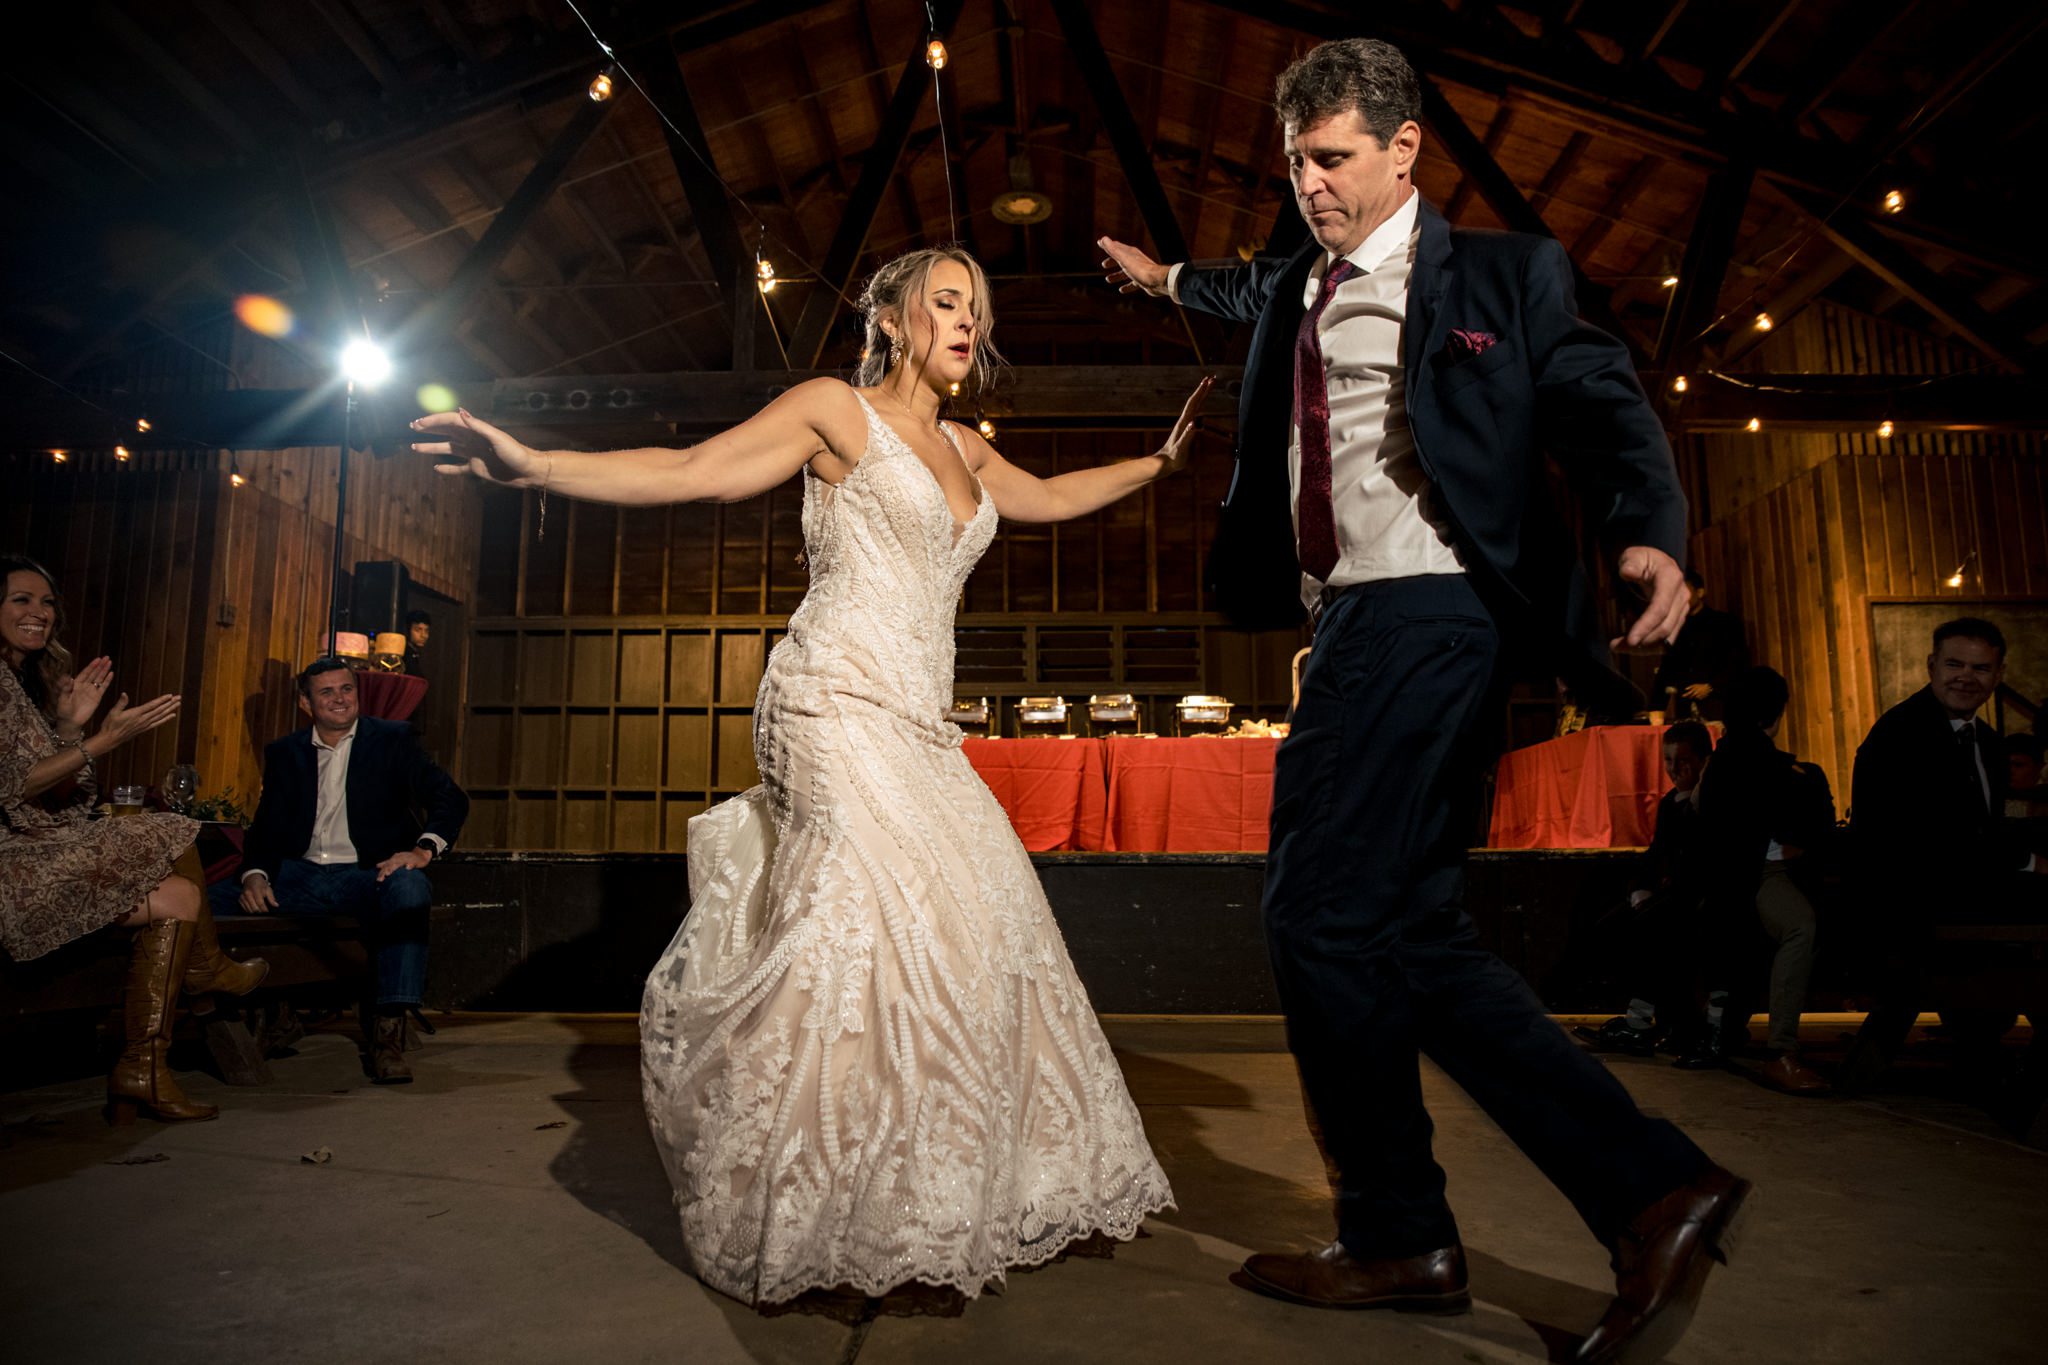 camp wedding reception at camp greystone in nc mountains